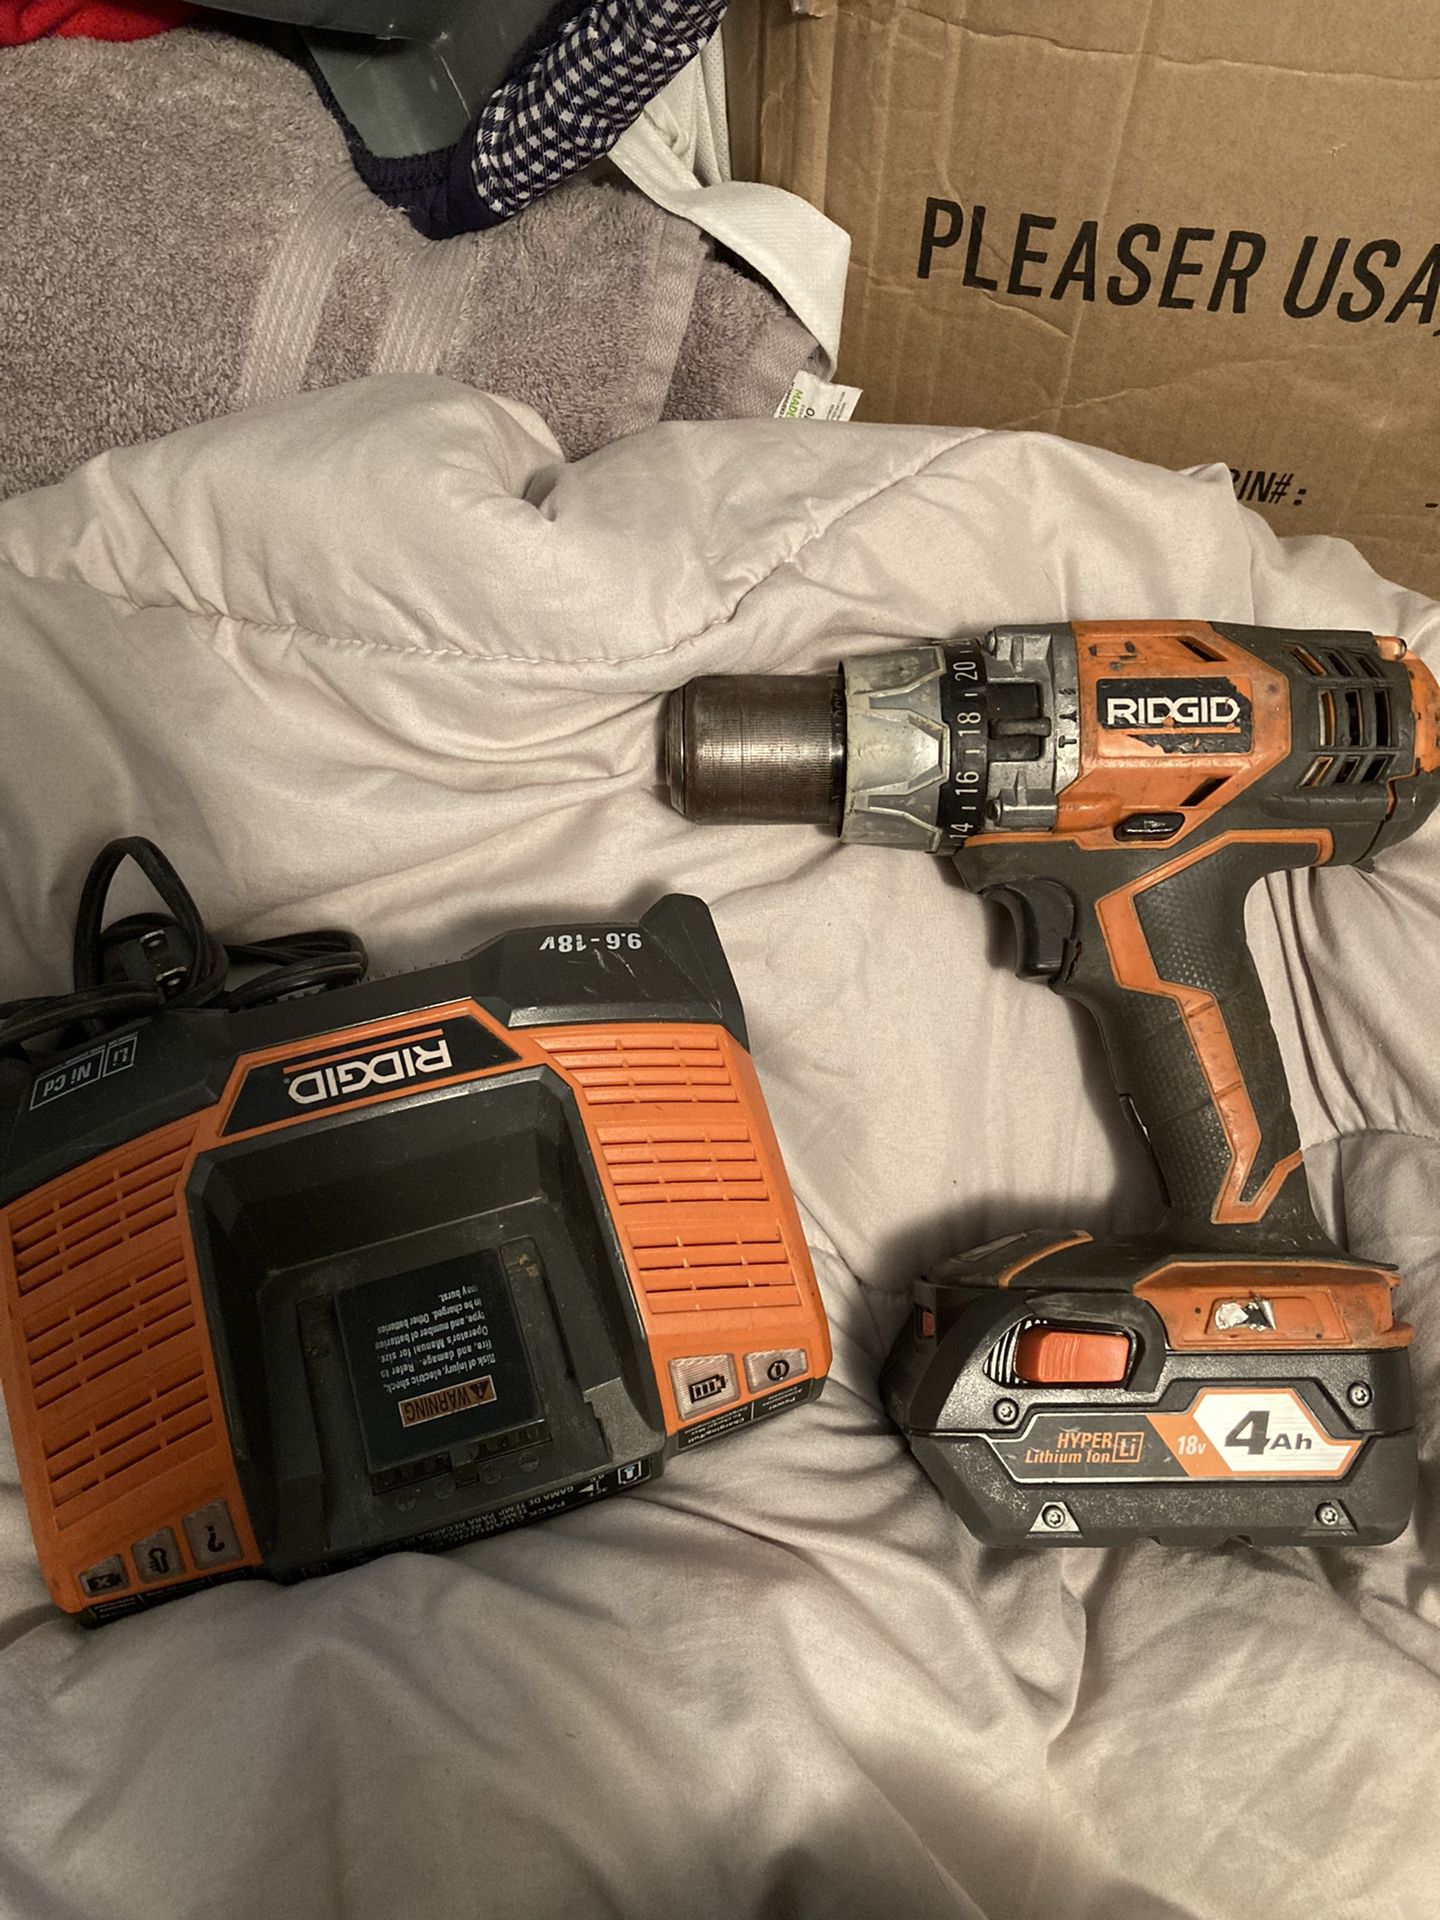 Rigid  Hammer Drill ( Battery & Charger  Included)